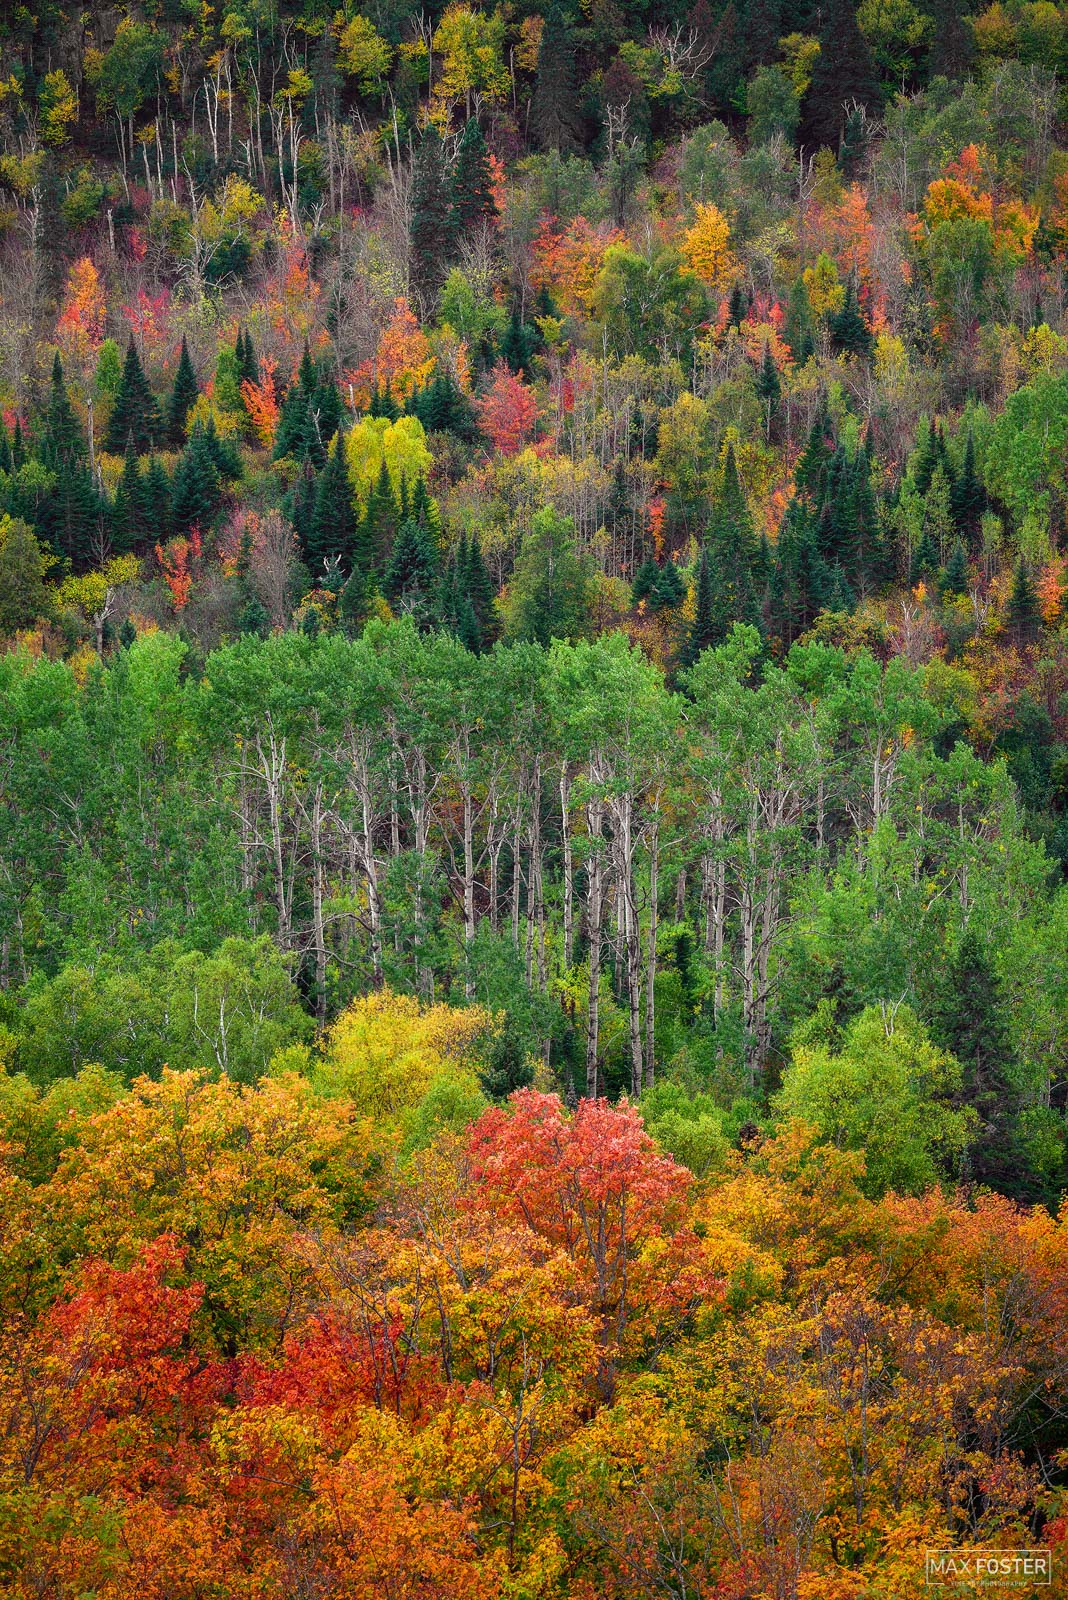 Elevate your space with Northwoods Contrast, Max Foster's limited edition photography print of Superior National Forest in Minnesota...